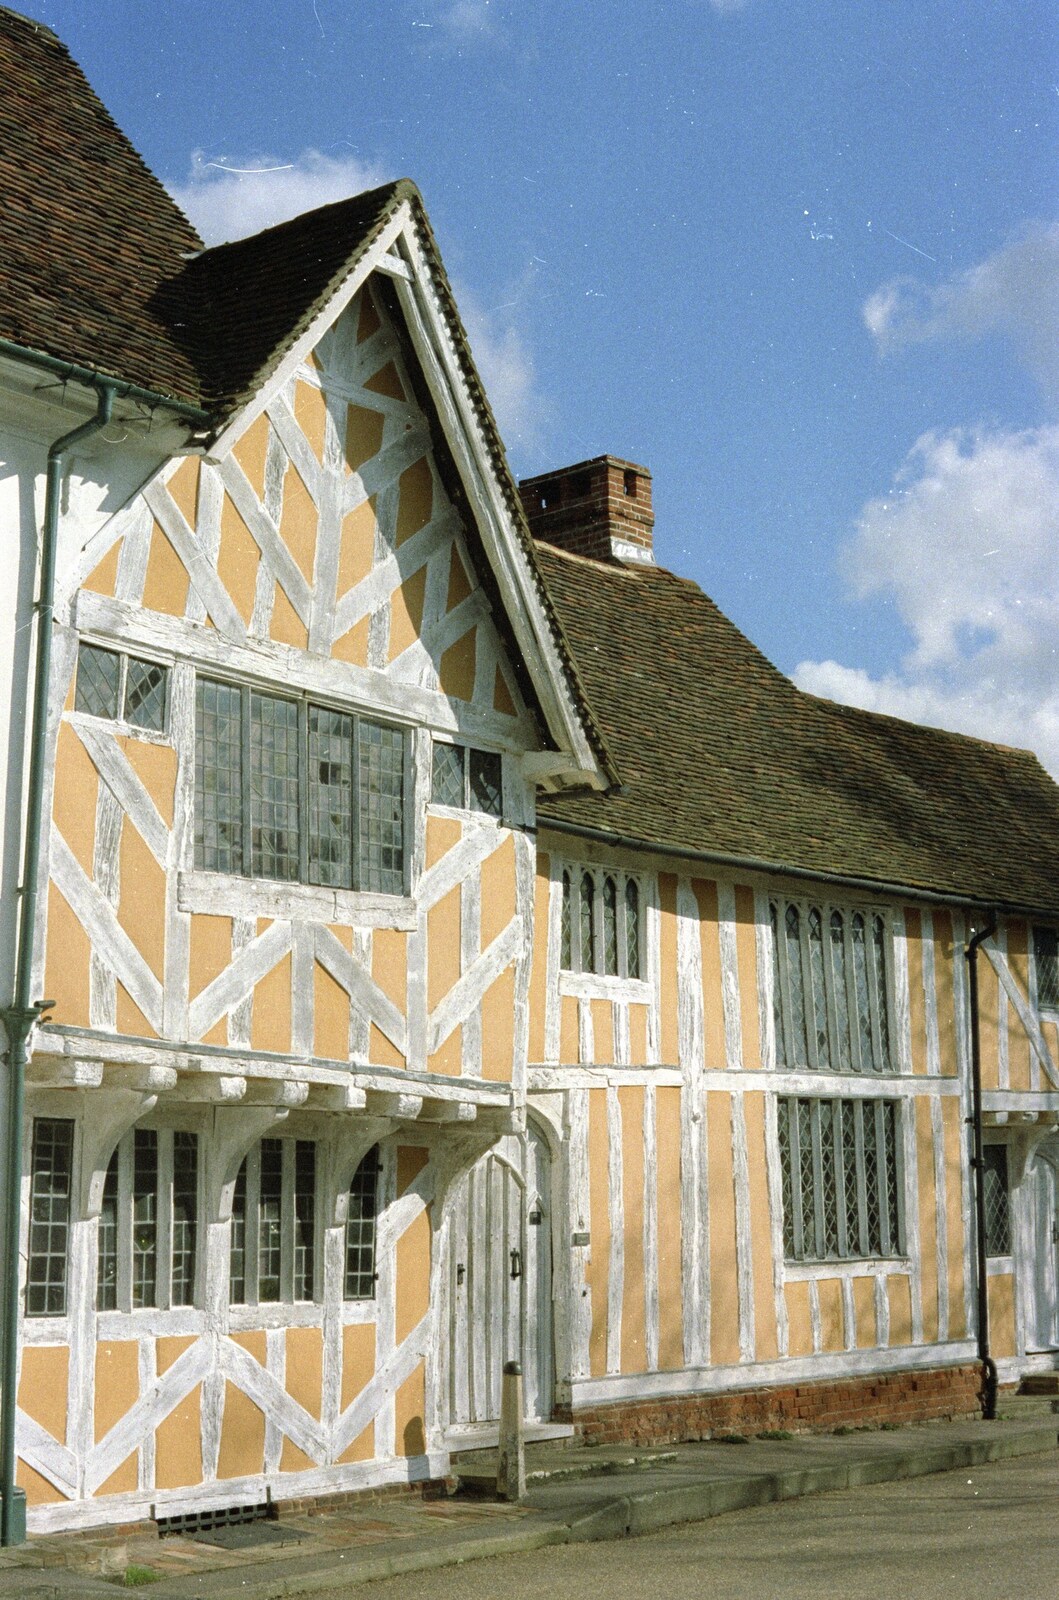 The orange house from Mother and Mike Visit, Lavenham, Suffolk - 14th April 1996